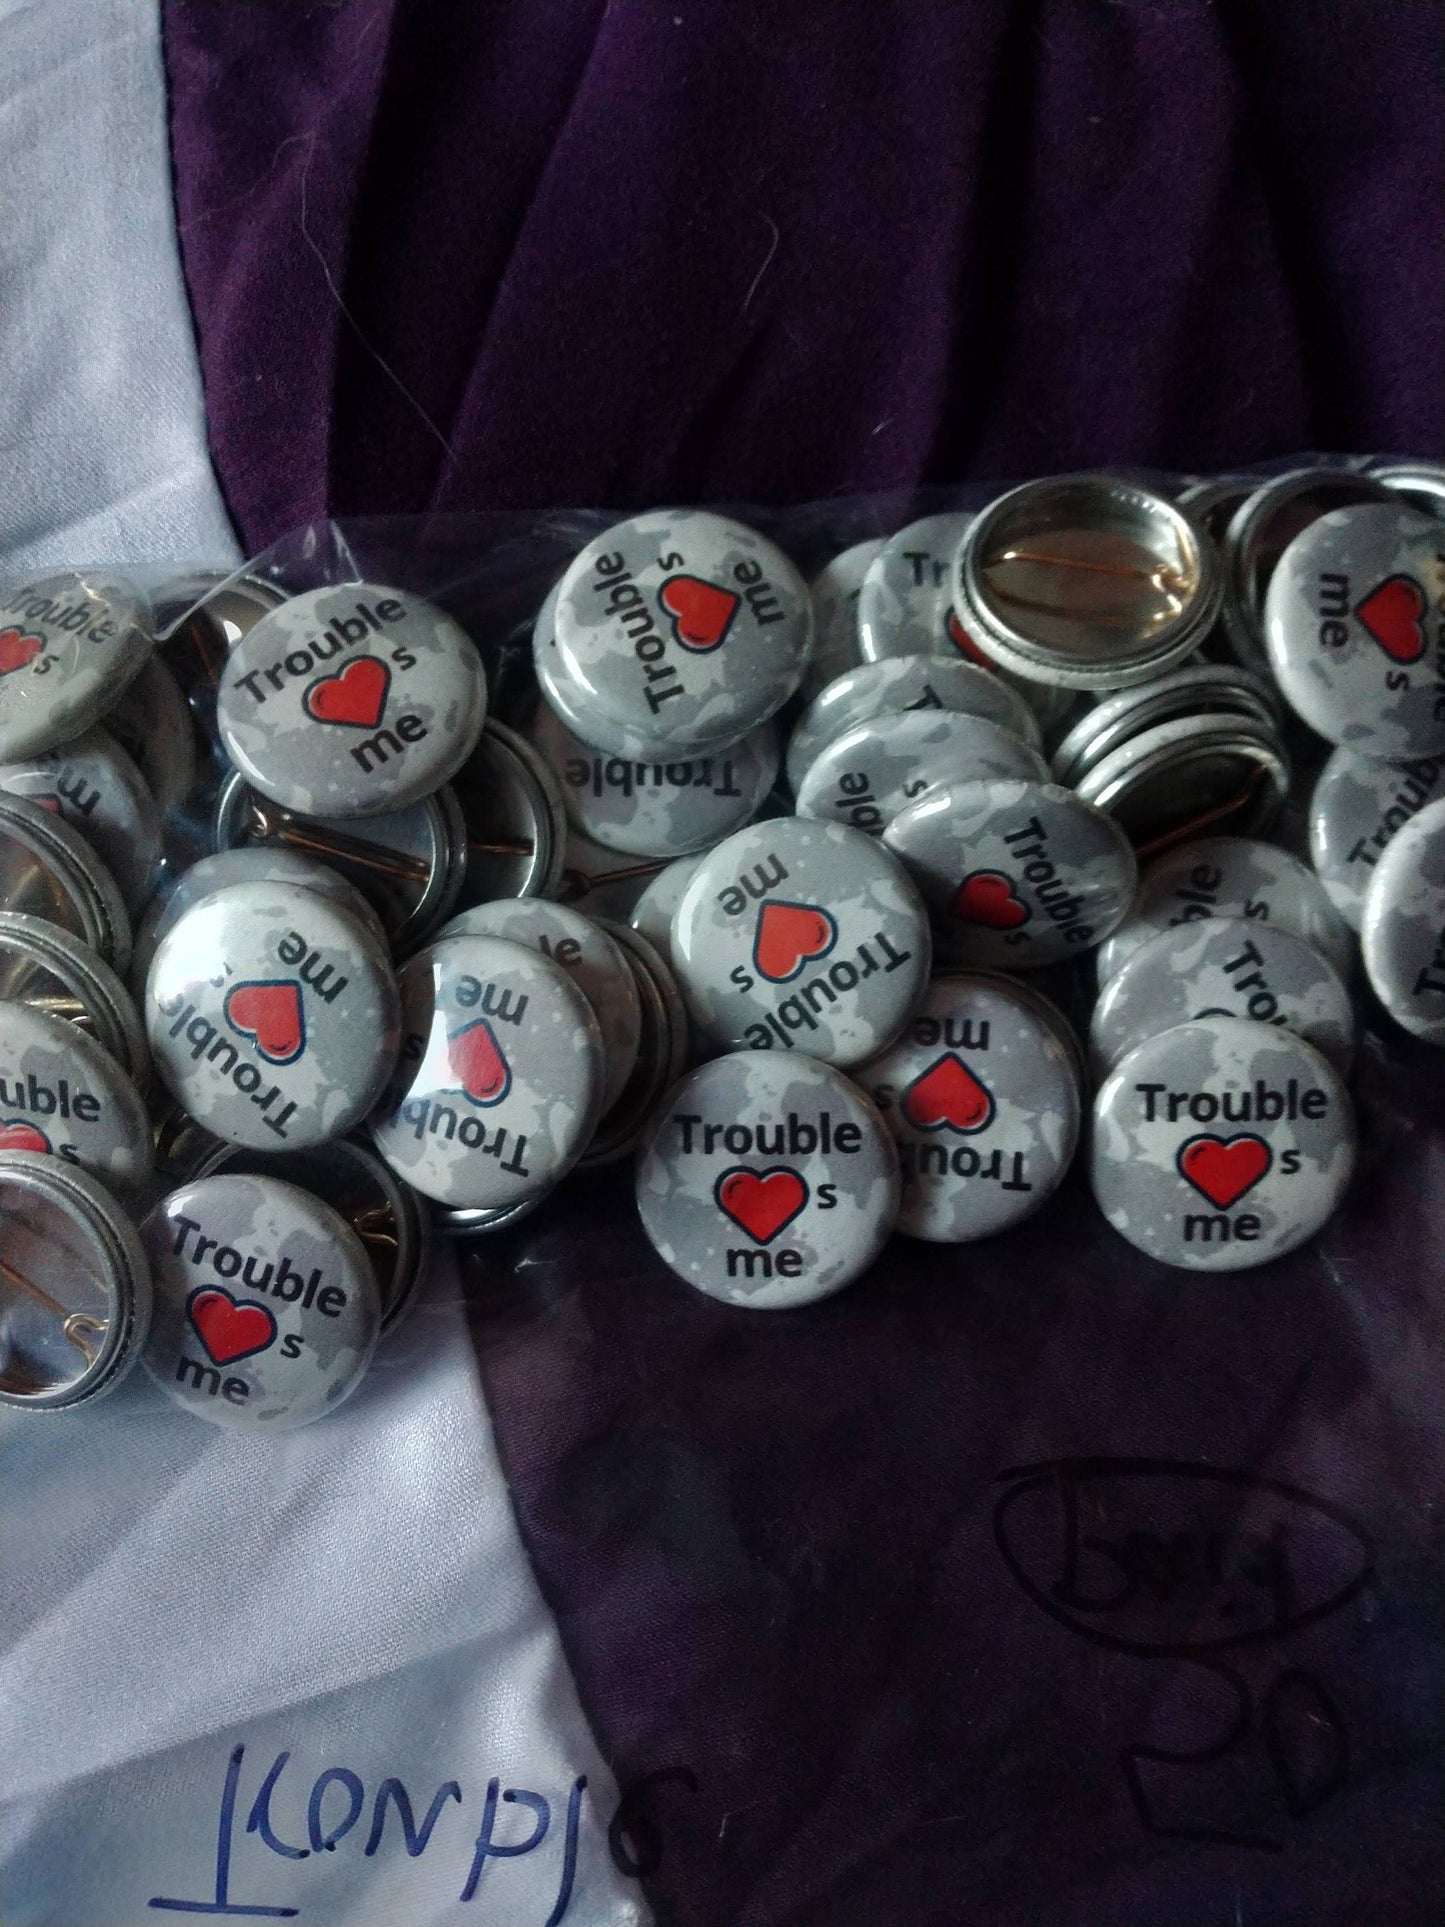 Custom 1" pinback buttons - your custom design on pinback badges - Make your event memorable for less than you'd expect!